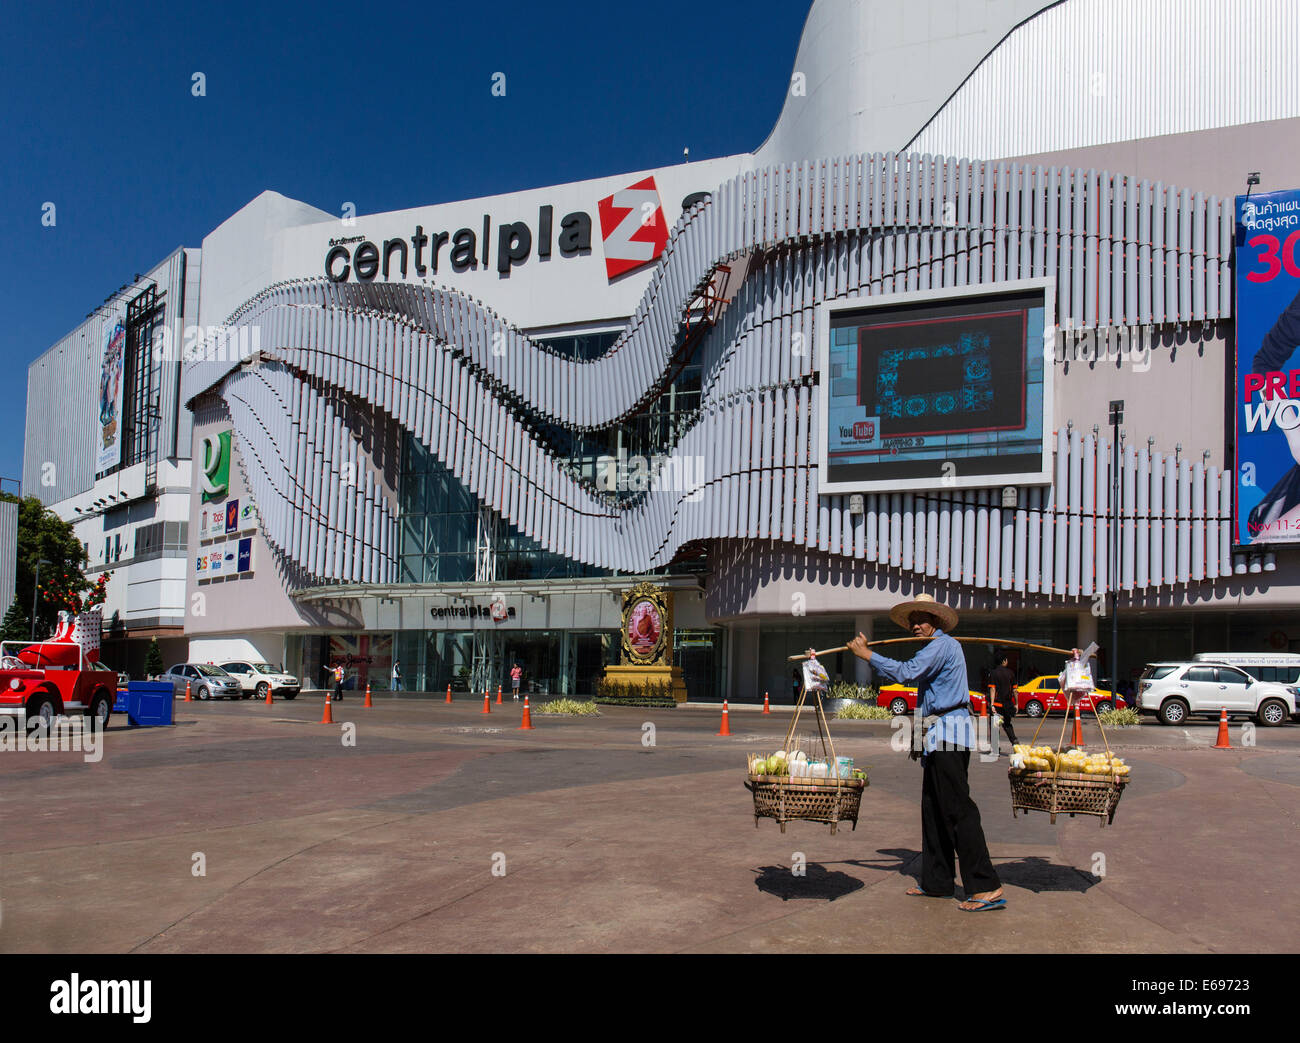 Market vendor carrying a yoke, in front of the Central Plaza Shopping Centre, Udon Thani, Isan, Thailand Stock Photo